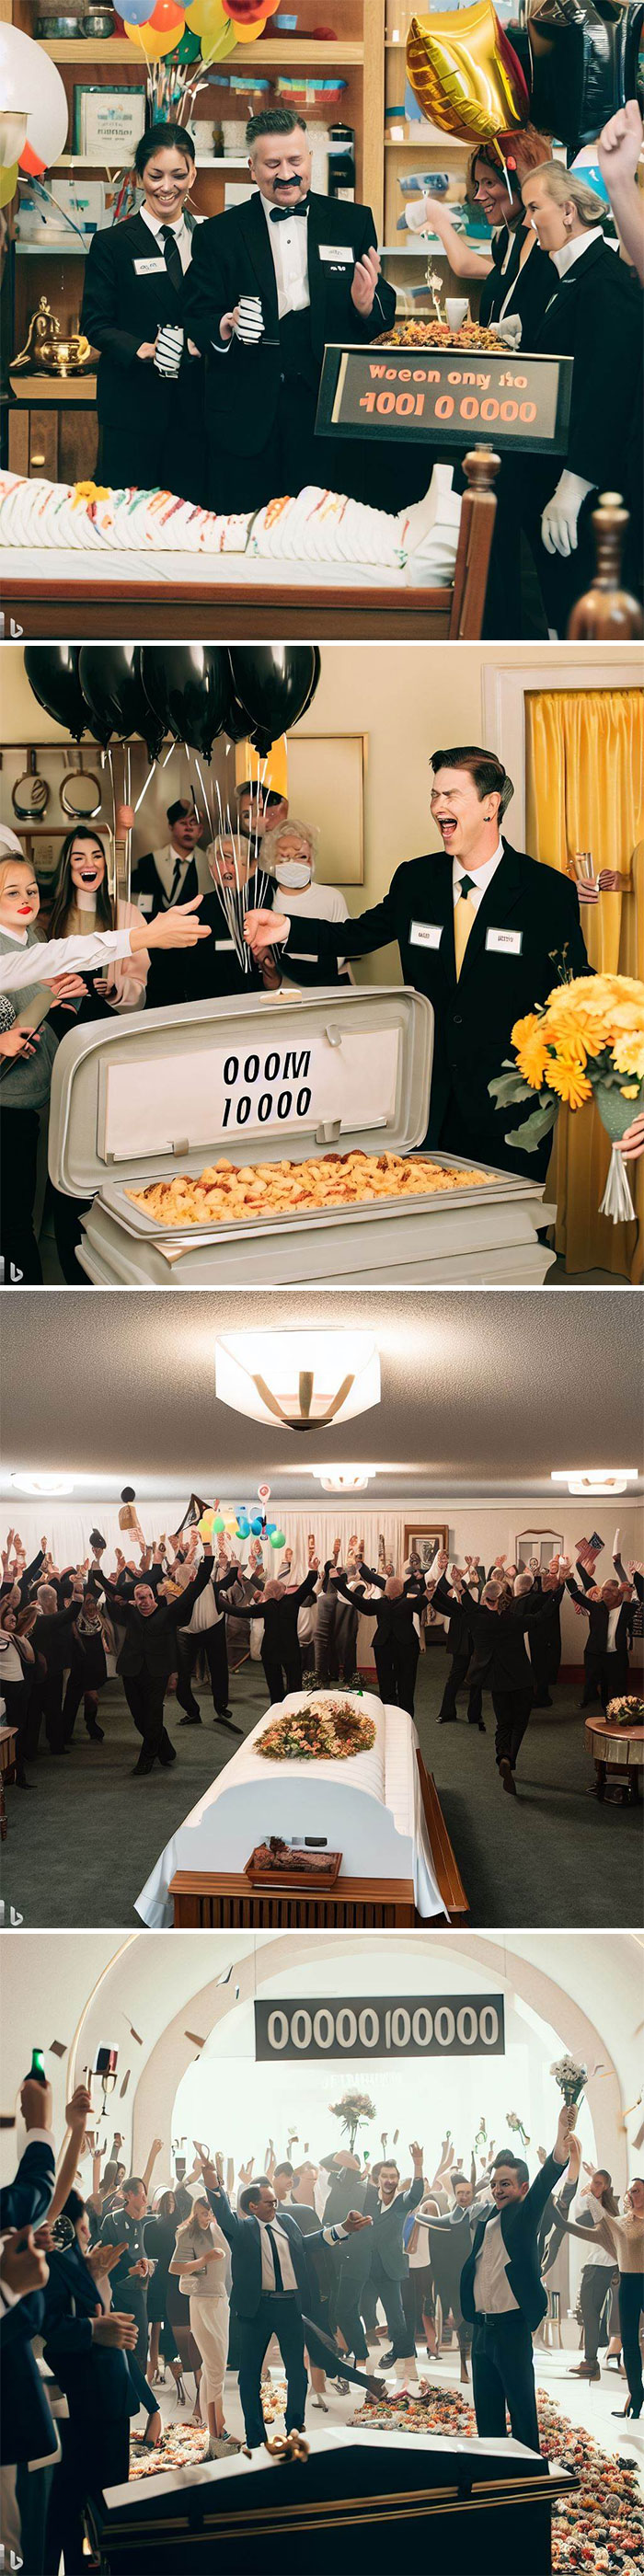 A Funeral Home Throwing A Welcome Party To Client Number One Thousand